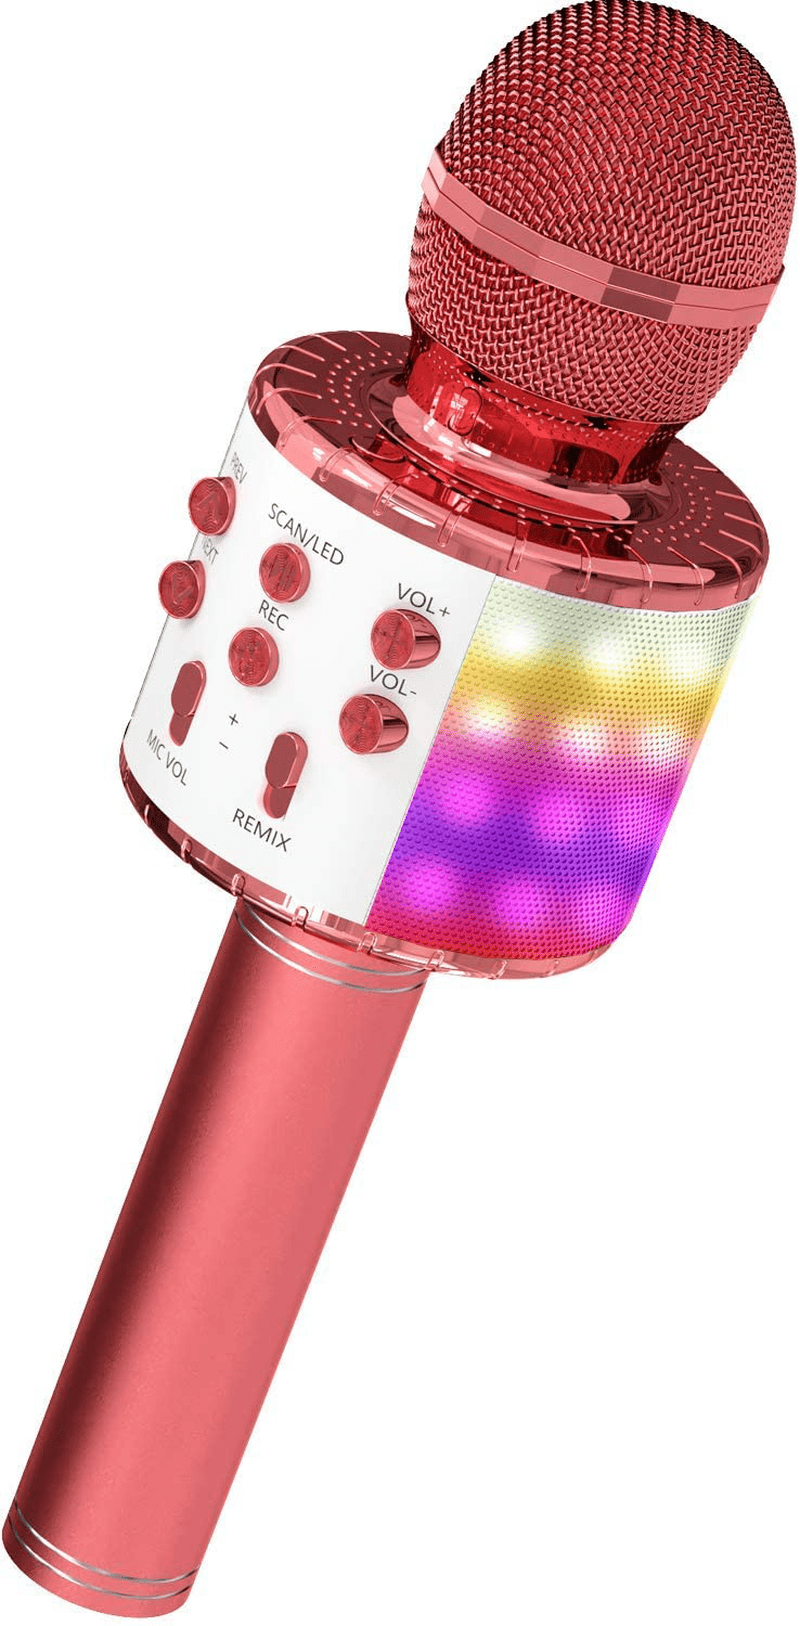 OVELLIC Karaoke Microphone for Kids, Wireless Bluetooth Karaoke Microphone with LED Lights, Portable Handheld Mic Speaker Machine, Great Gifts Toys for Girls Boys Adults All Age (Rose Gold) Electronics > Audio > Audio Components > Microphones OVELLIC Red  